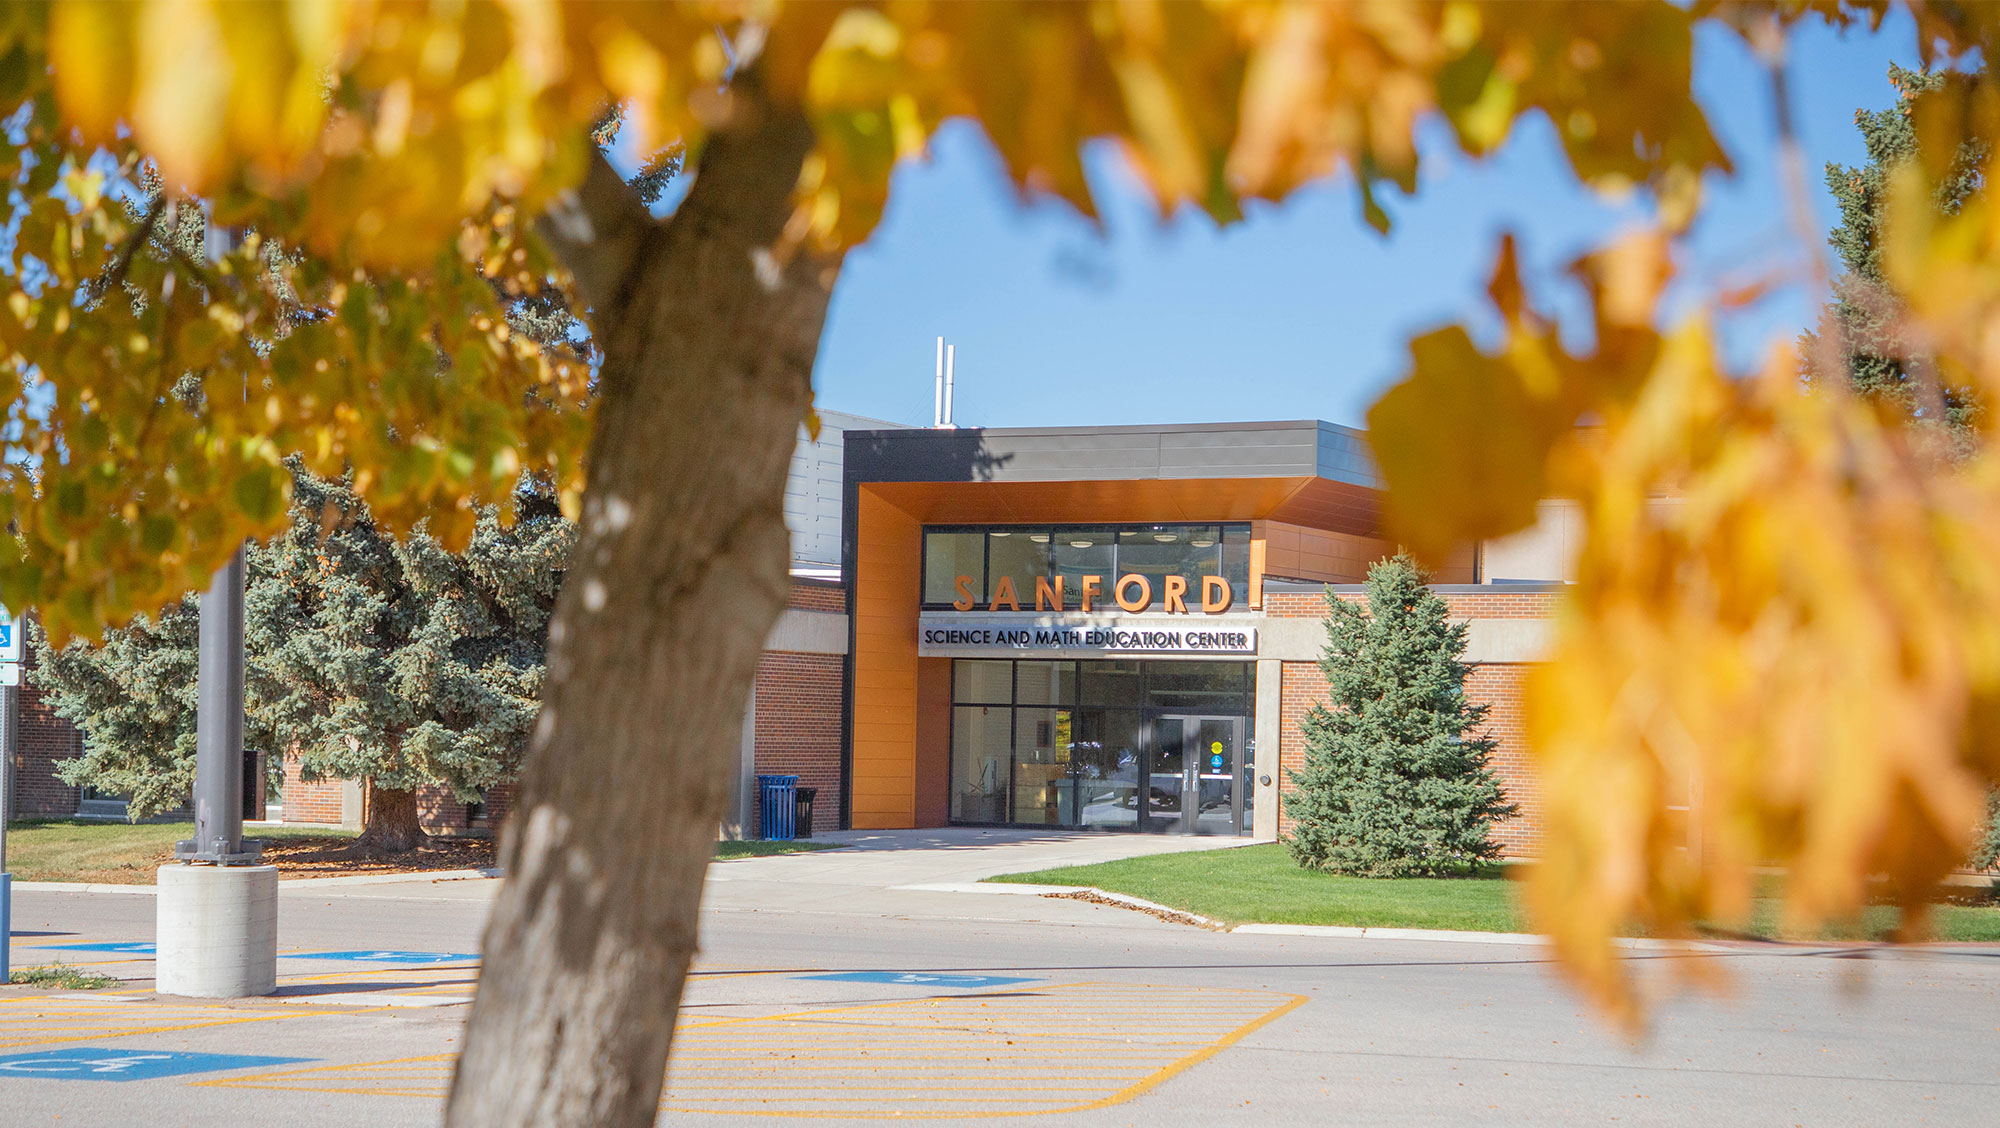 The front of the Sanford Education Center at BHSU during fall